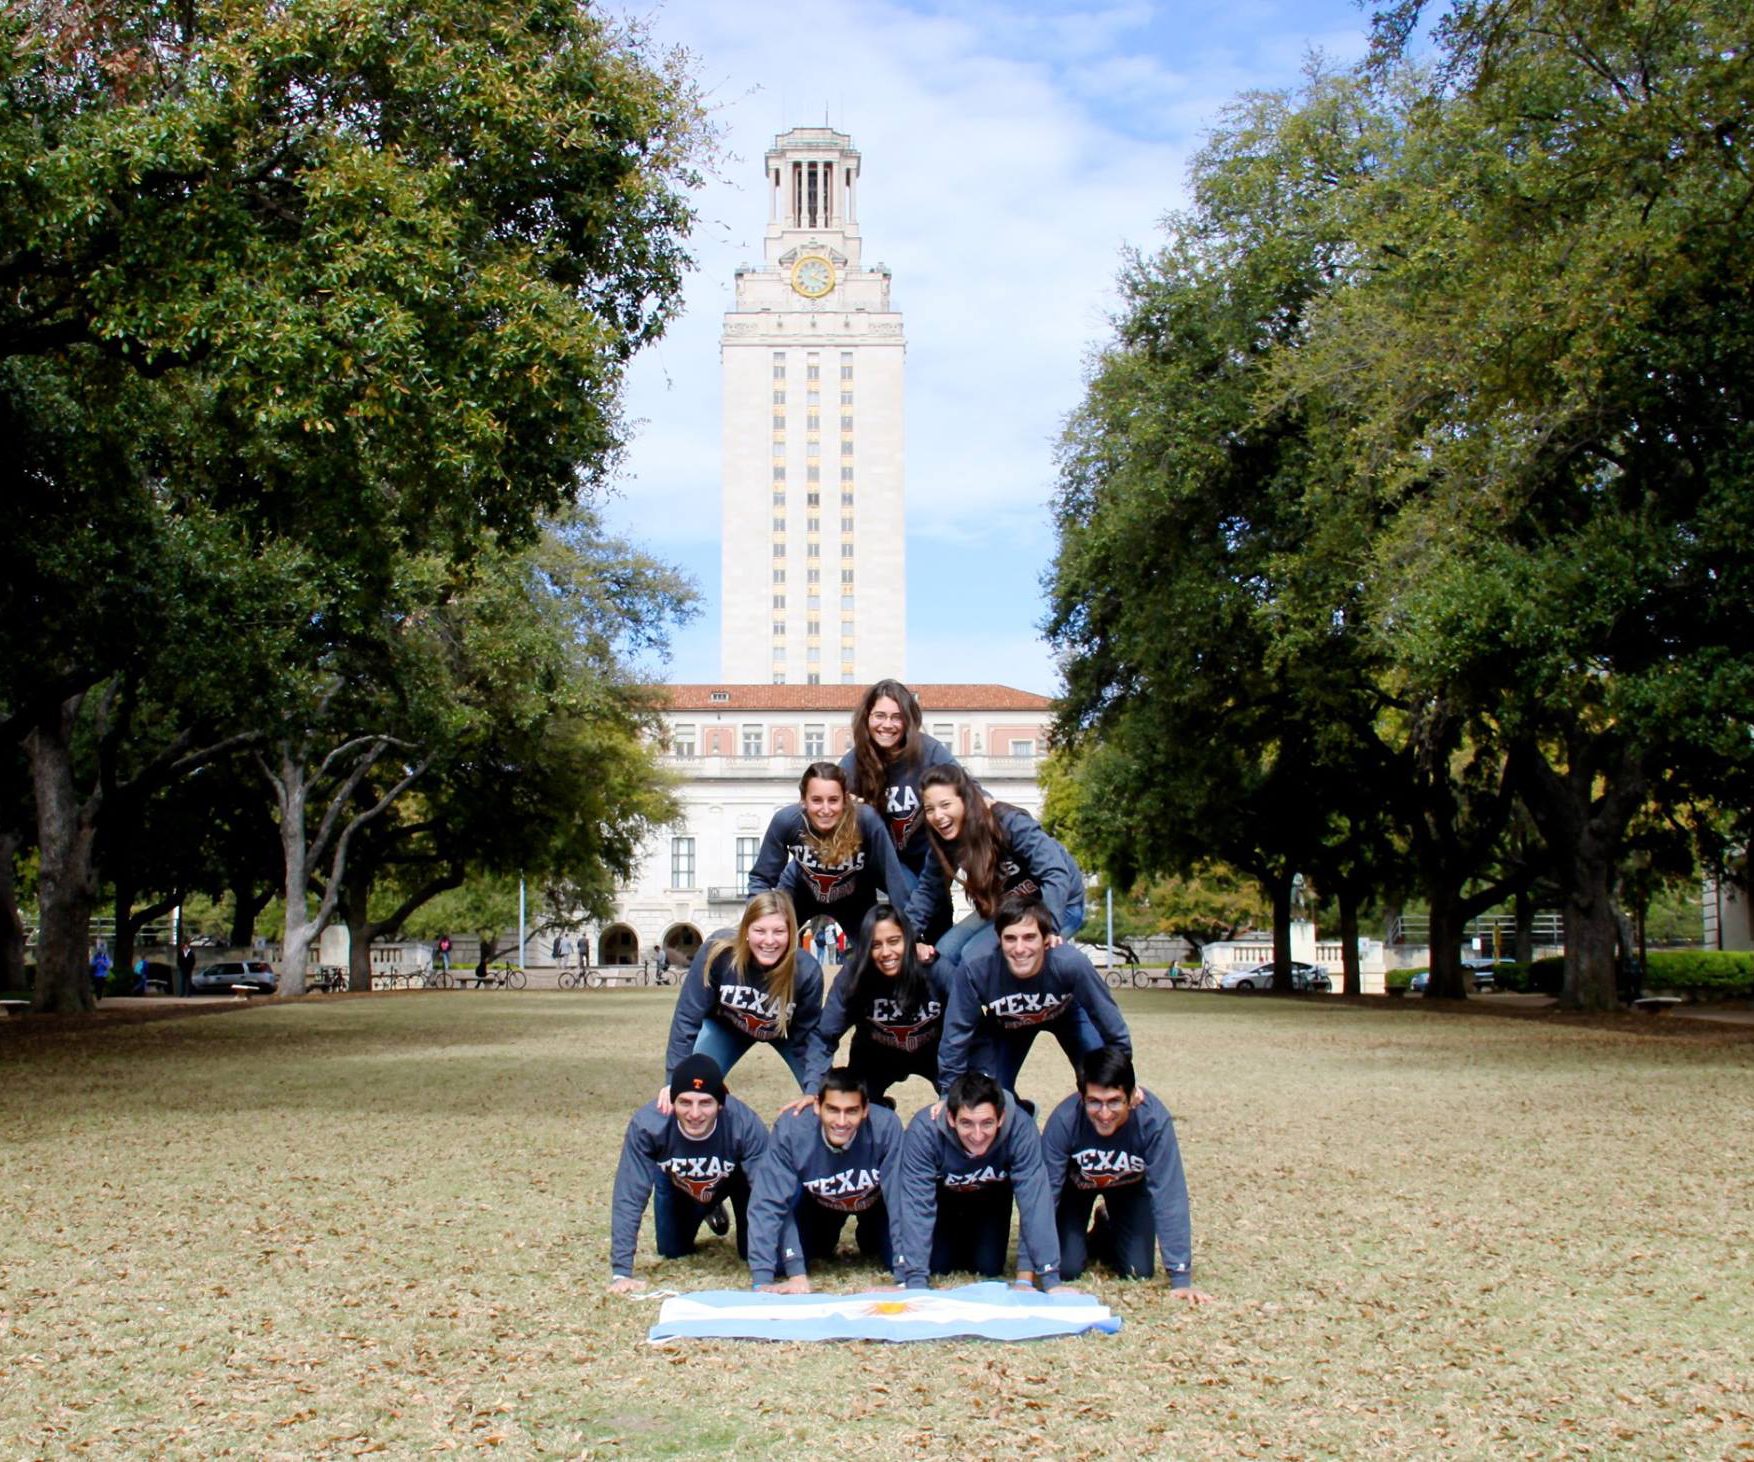 Gabriel Carlosena and his friends from the English Language Center program building a human pyramid in front of the UT Tower